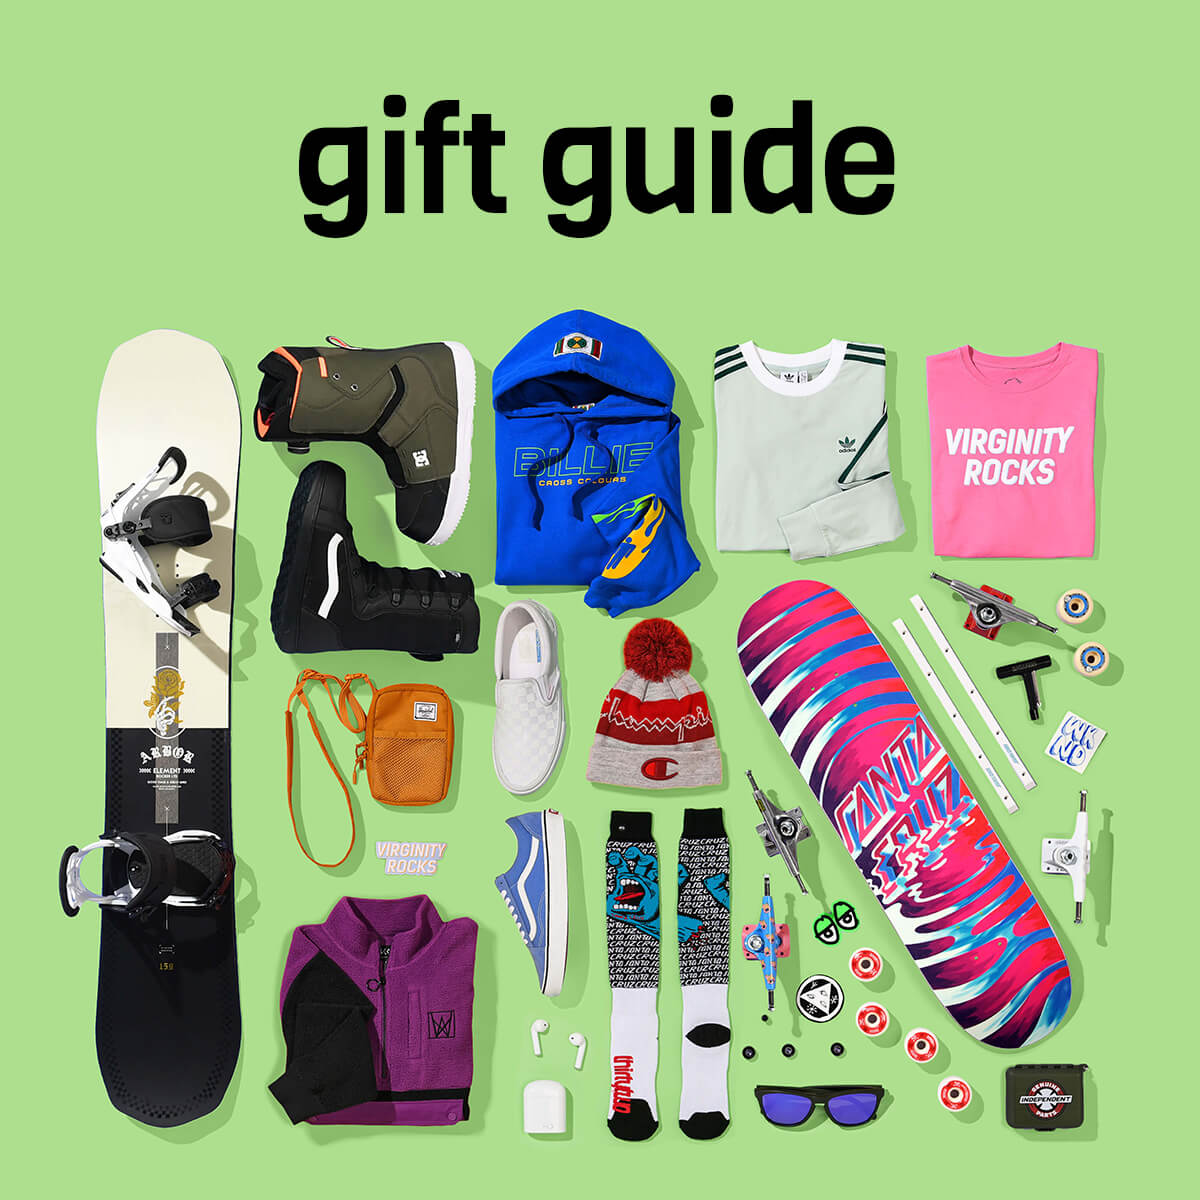 THE HOLIDY GIFT GUIDE IS HERE - SHOP NOW